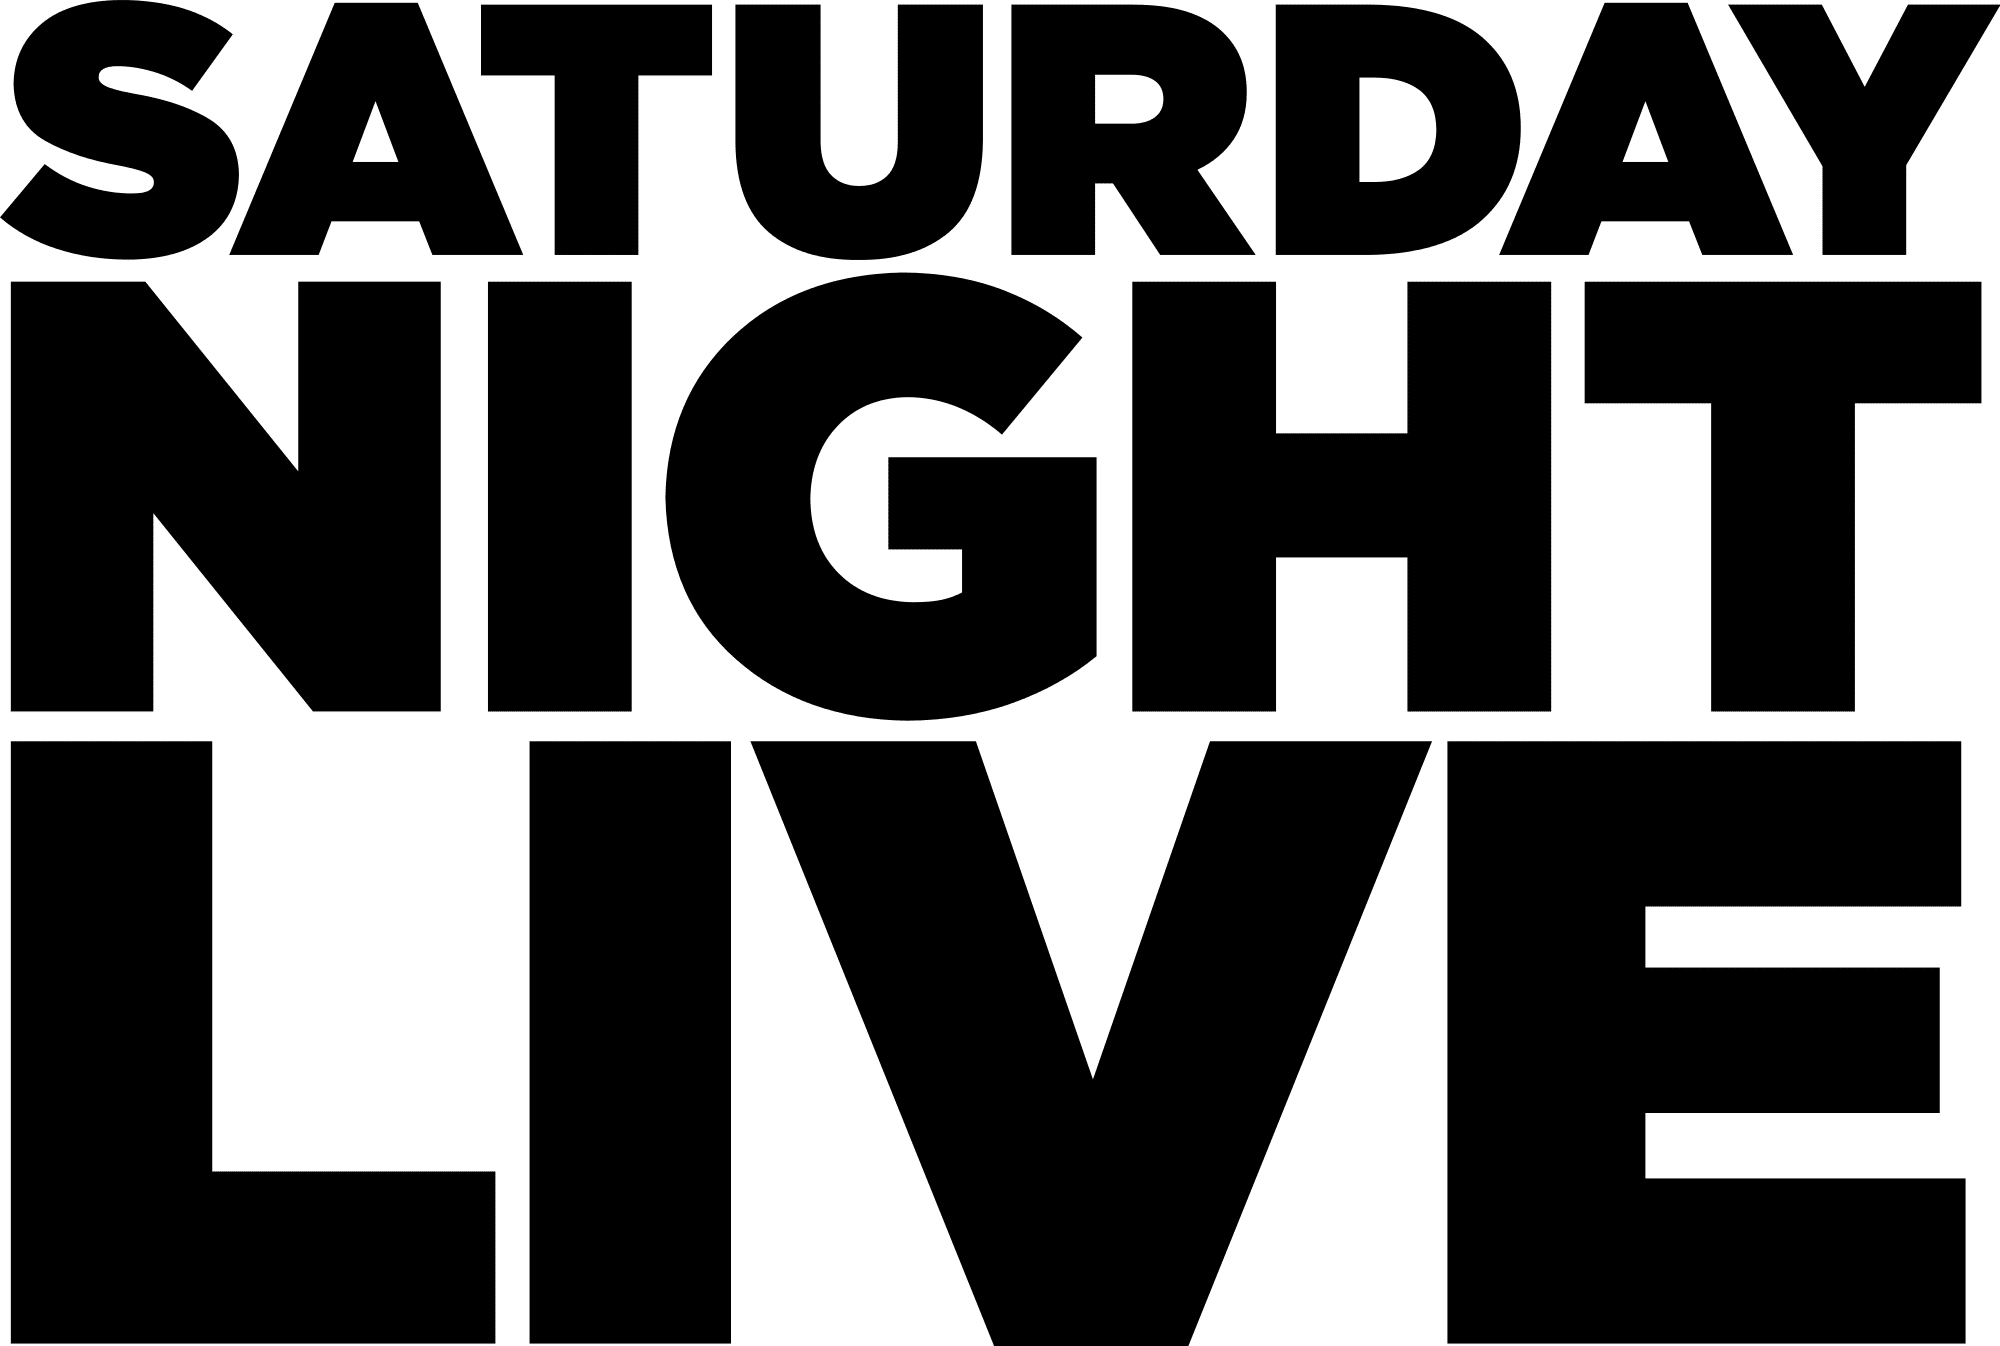 This SNL Writer Still Irks Me – How About You?